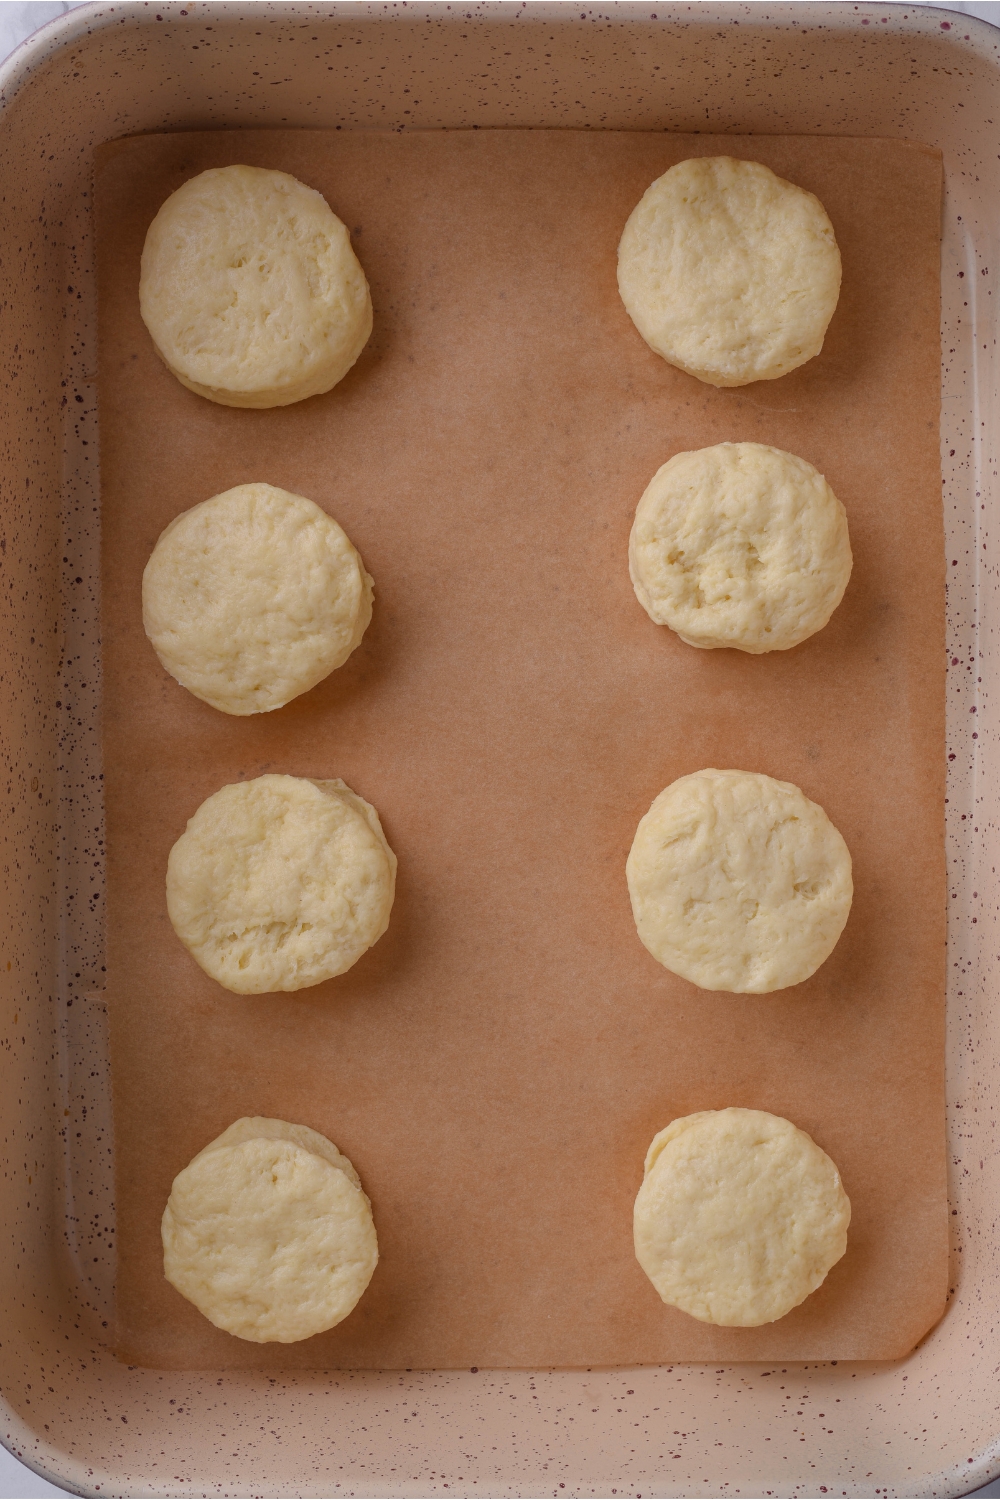 A baking sheet lined with parchment paper with 8 cutout biscuits